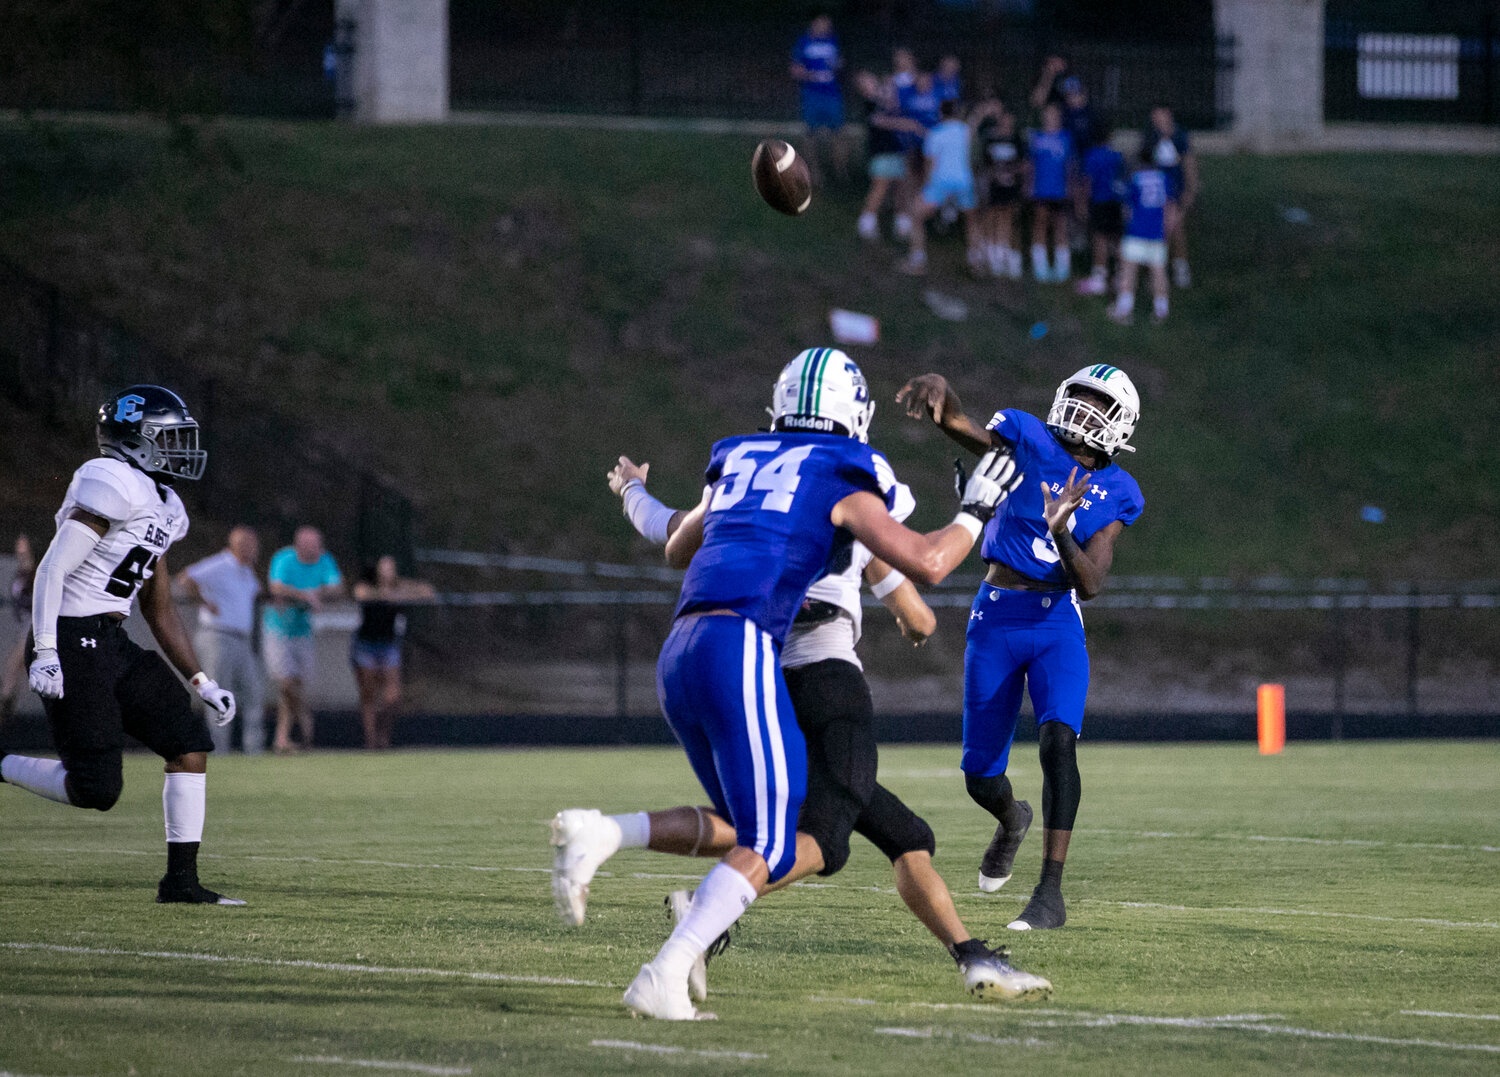 Admiral quarterback Samuel Dunn launches a throw downfield during his first start of his sophomore season at Bayside Academy Friday night at Freedom Field in Daphne. Dunn threw three touchdown passes to help the Admirals start the season with a 33-7 win over the Elberta Warriors.